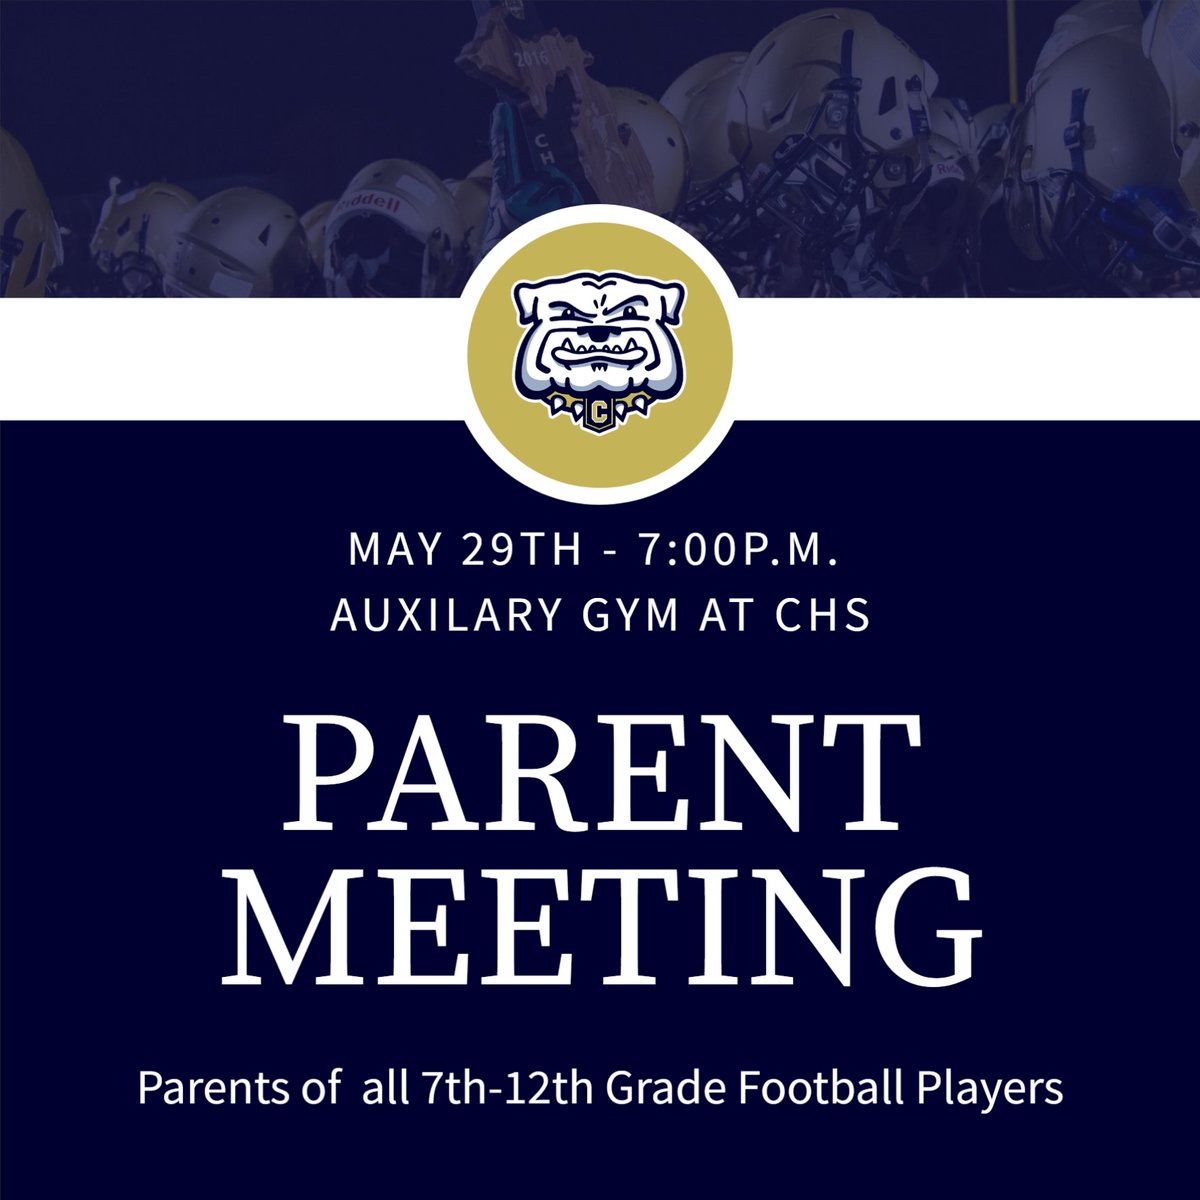 Reminder- Important parent meeting for all incoming 7th-12th Grade Bulldog Football Parents! It is important that at least one parent attend. May 29th, 7PM in the Auxiliary Gym at Chelsea High School. #NEXT